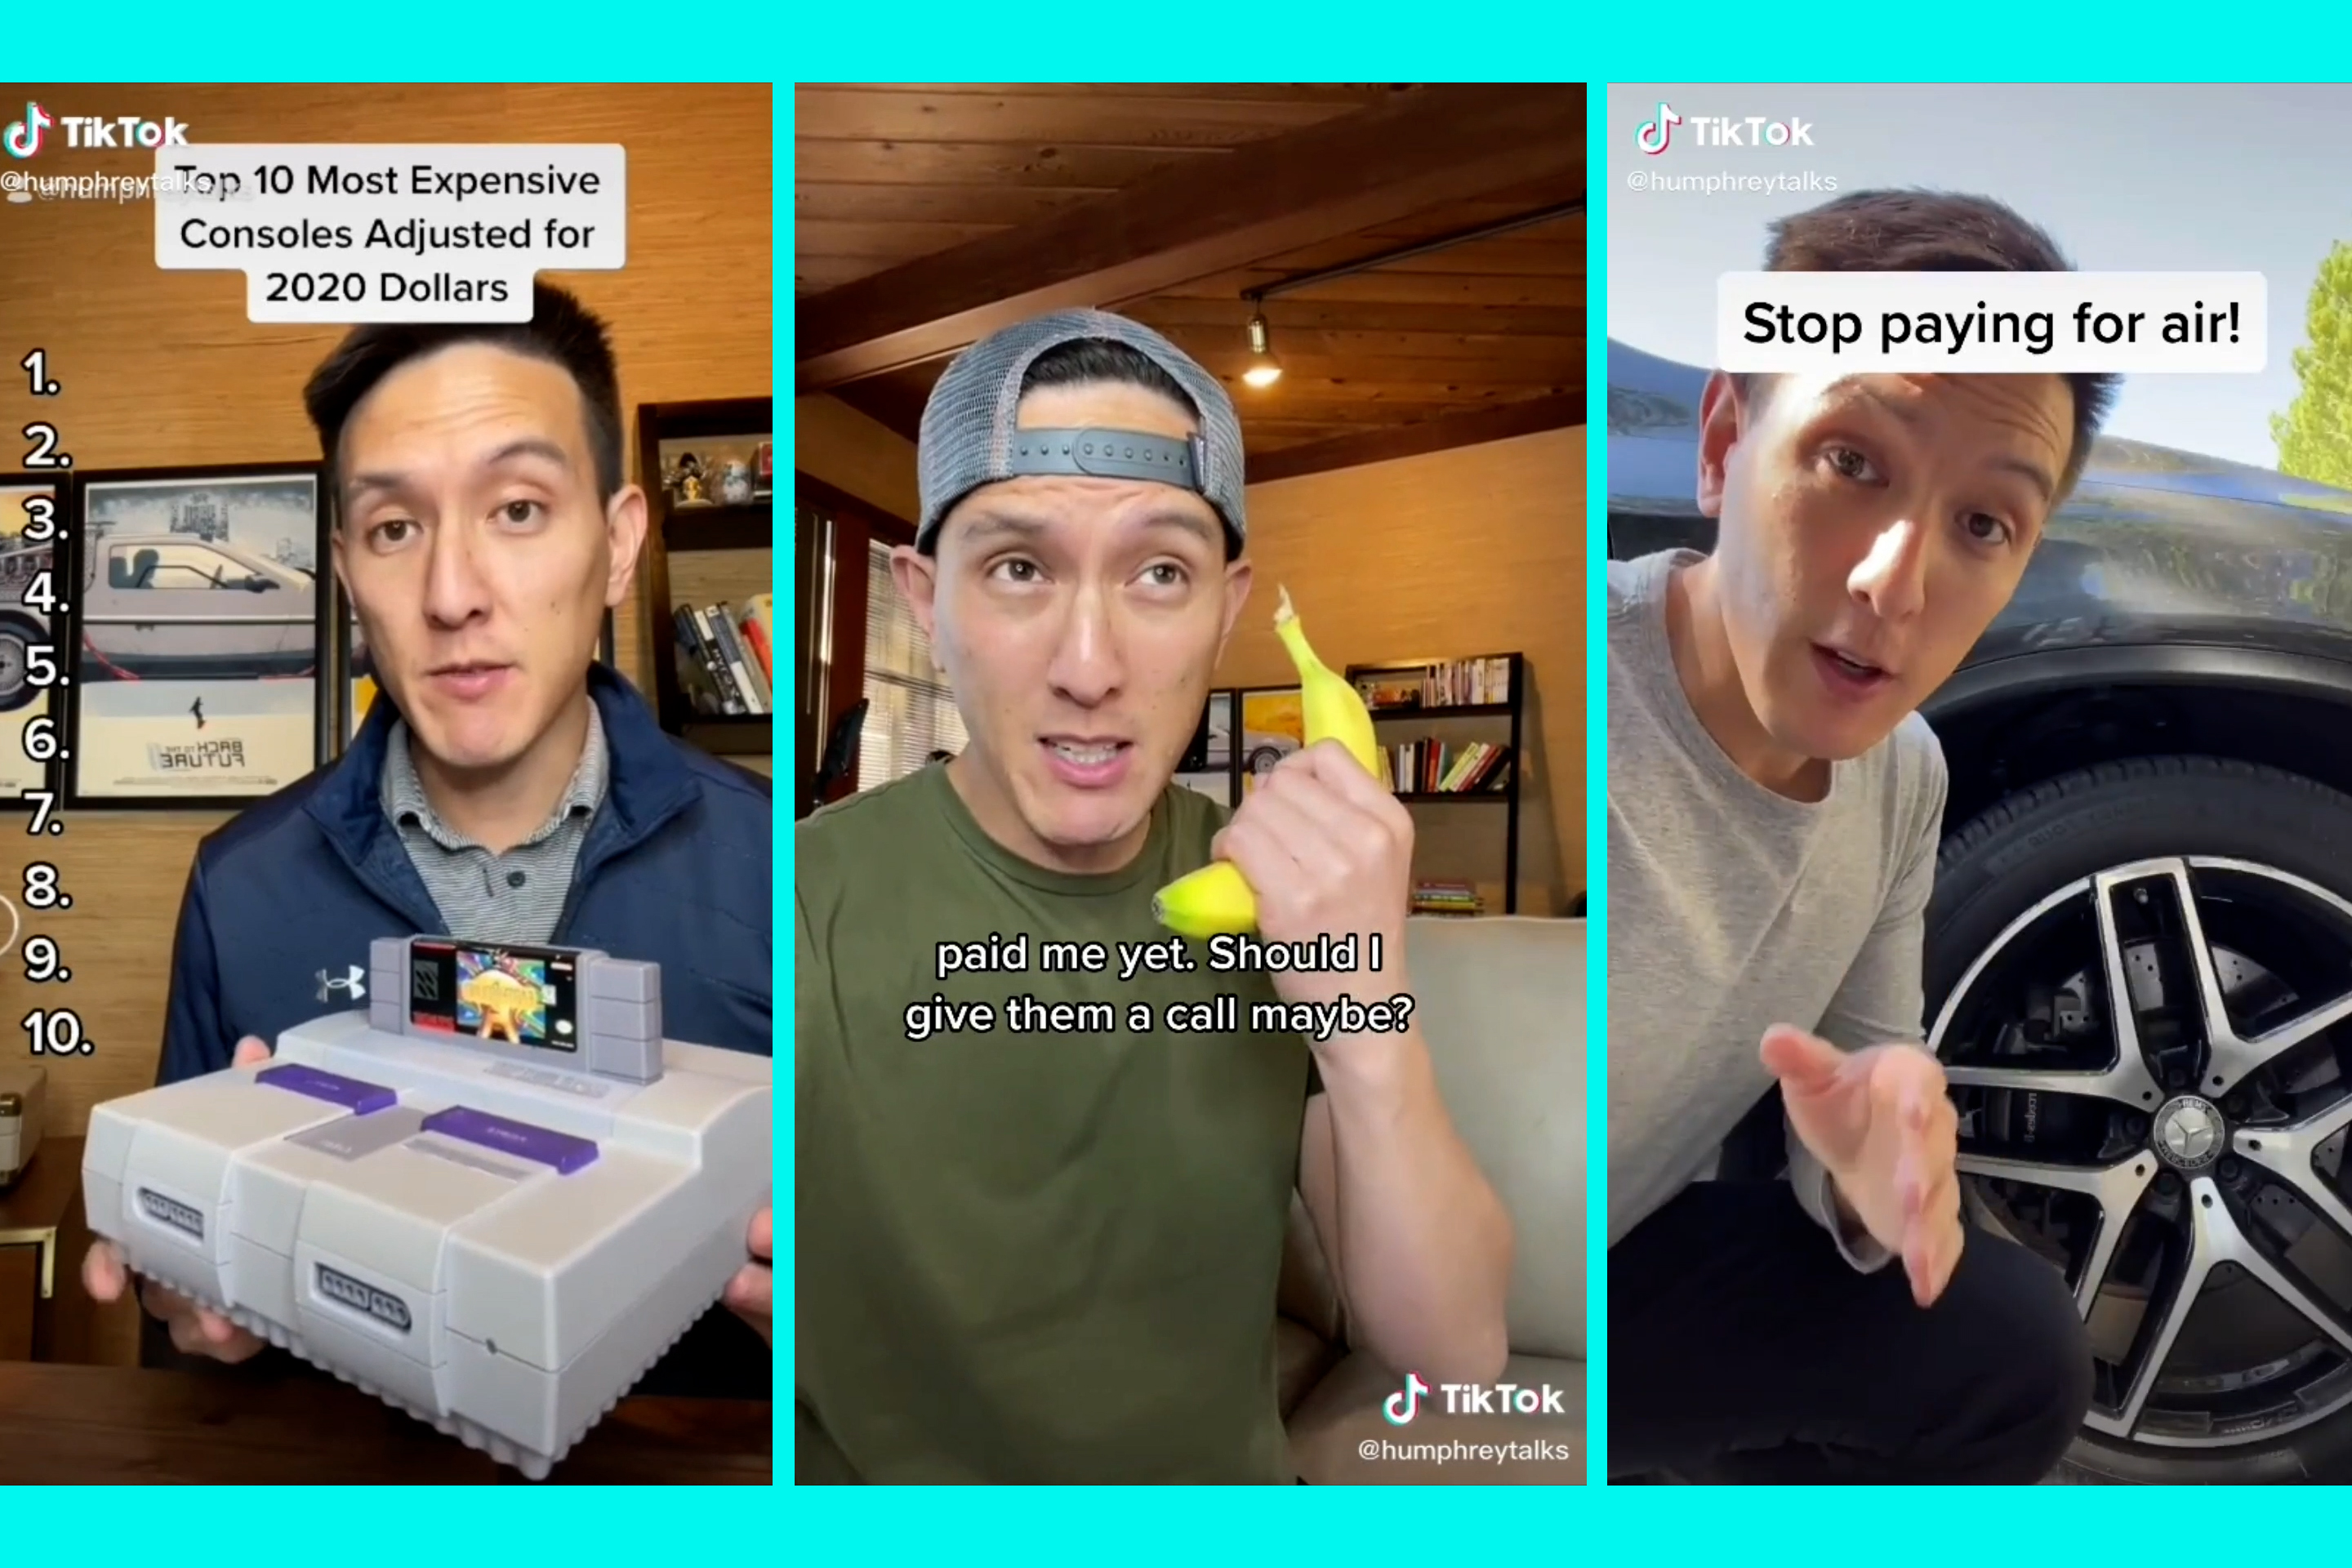 A Viral Takedown of a $45 Hydro Flask Turned This Former Wall Streeter Into a TikTok Star